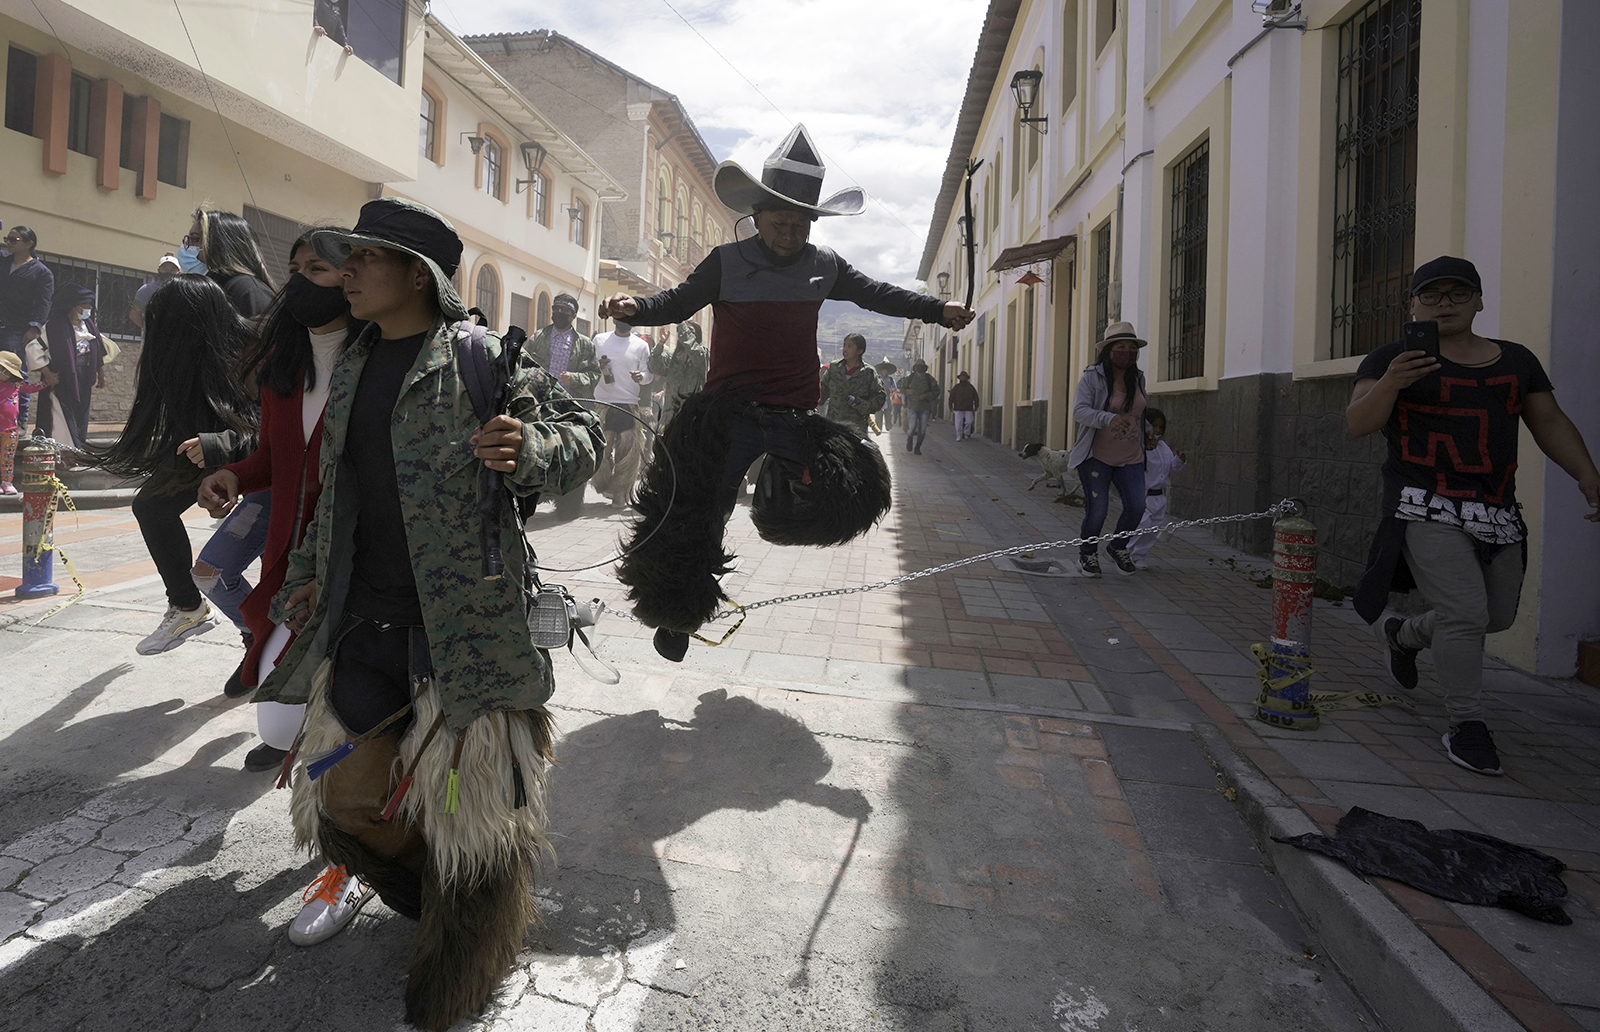 Revelers dance during the "Inti Raymi," or Sun Festival celebrations, despite restrictions to prevent the spread of the new coronavirus, in Cotacachi, Ecuador, Thursday, June 24, 2021. Across the Andes, from the tip of Argentina as far north as Colombia, indigenous communities gather in June for the southern hemisphere's winter solstice to pay homage to Inti, the ancient Incan sun god, in hopes of being granted a plentiful harvest. (AP Photo/Dolores Ochoa)